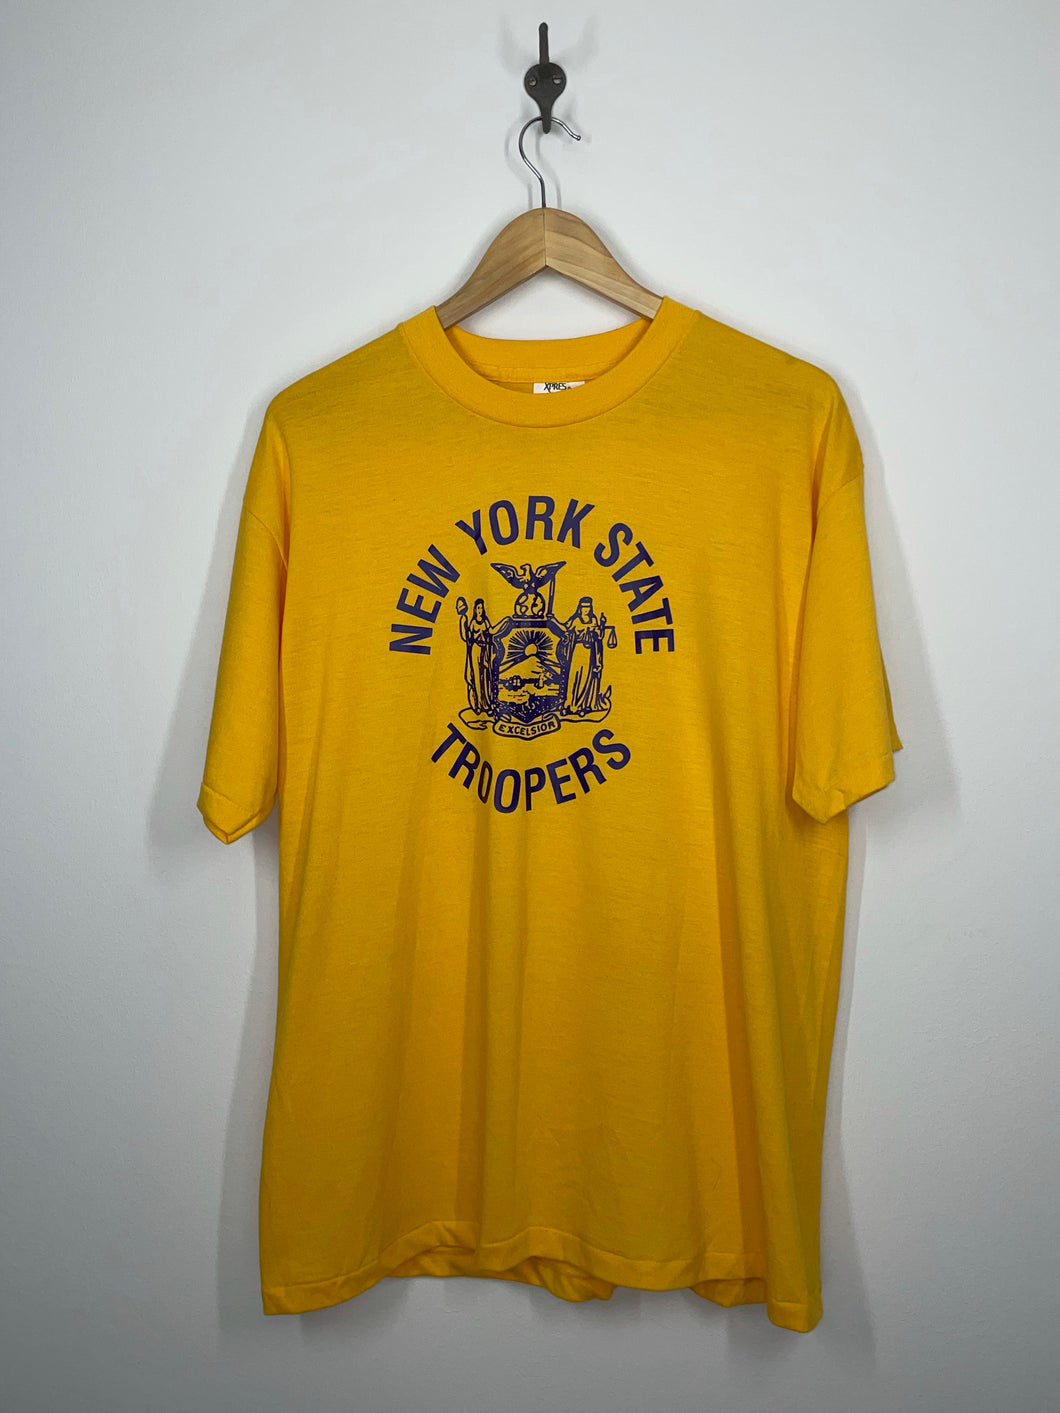 New York NY State Troopers T Shirt - XPres Knits - XL